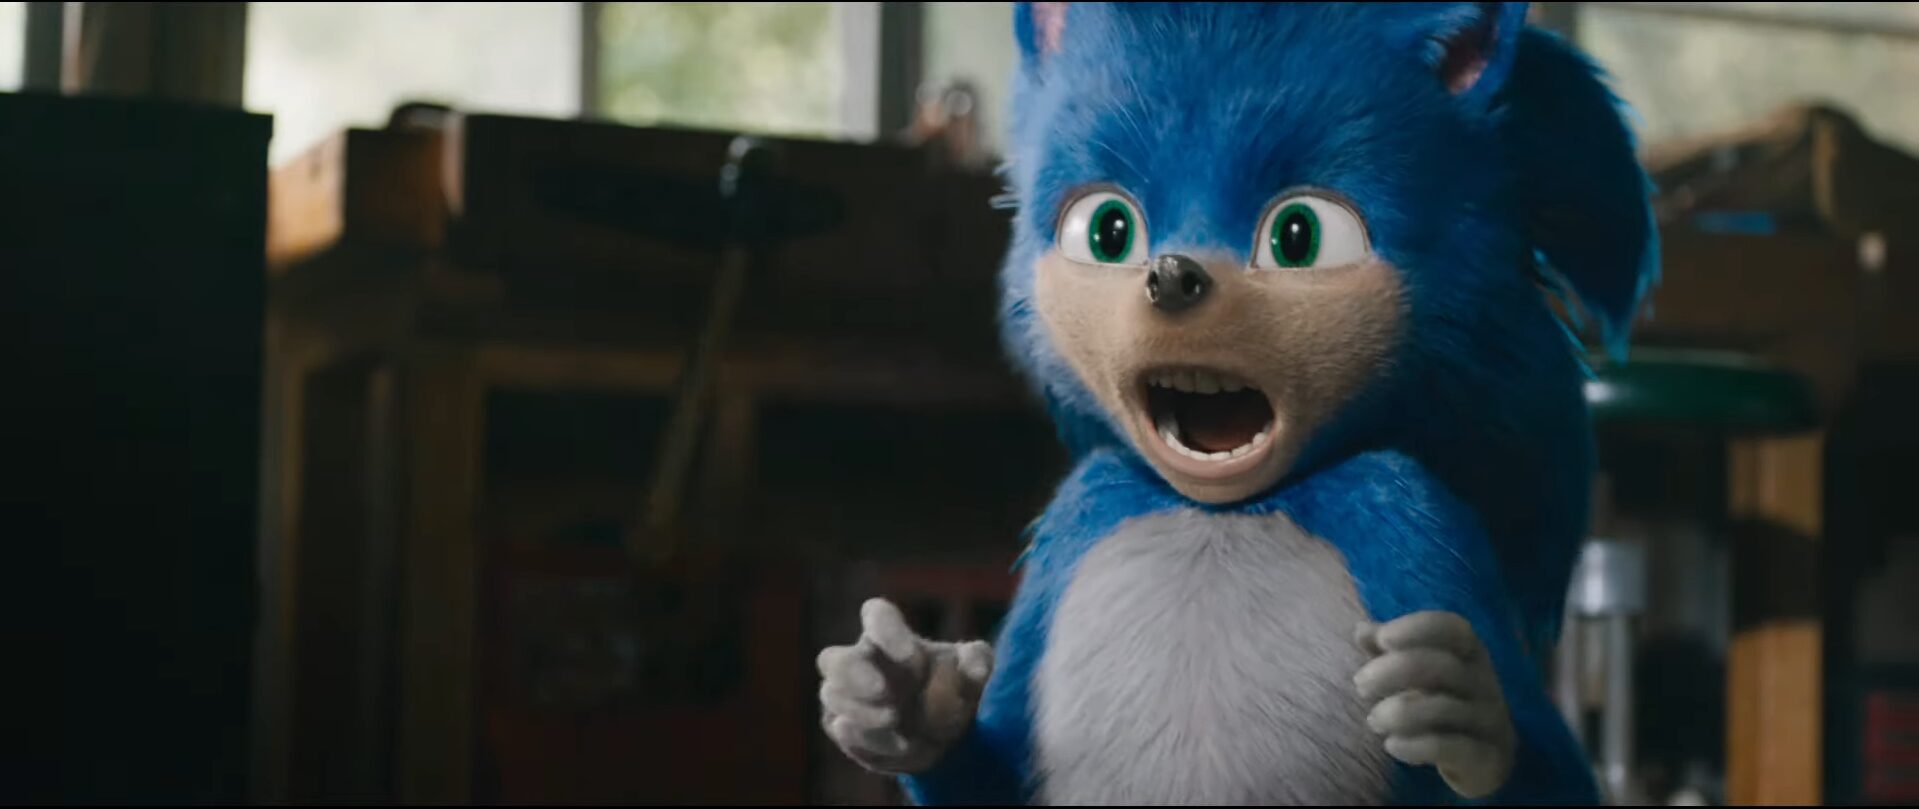 The Sonic The Hedgehog Movie Trailer Came Out